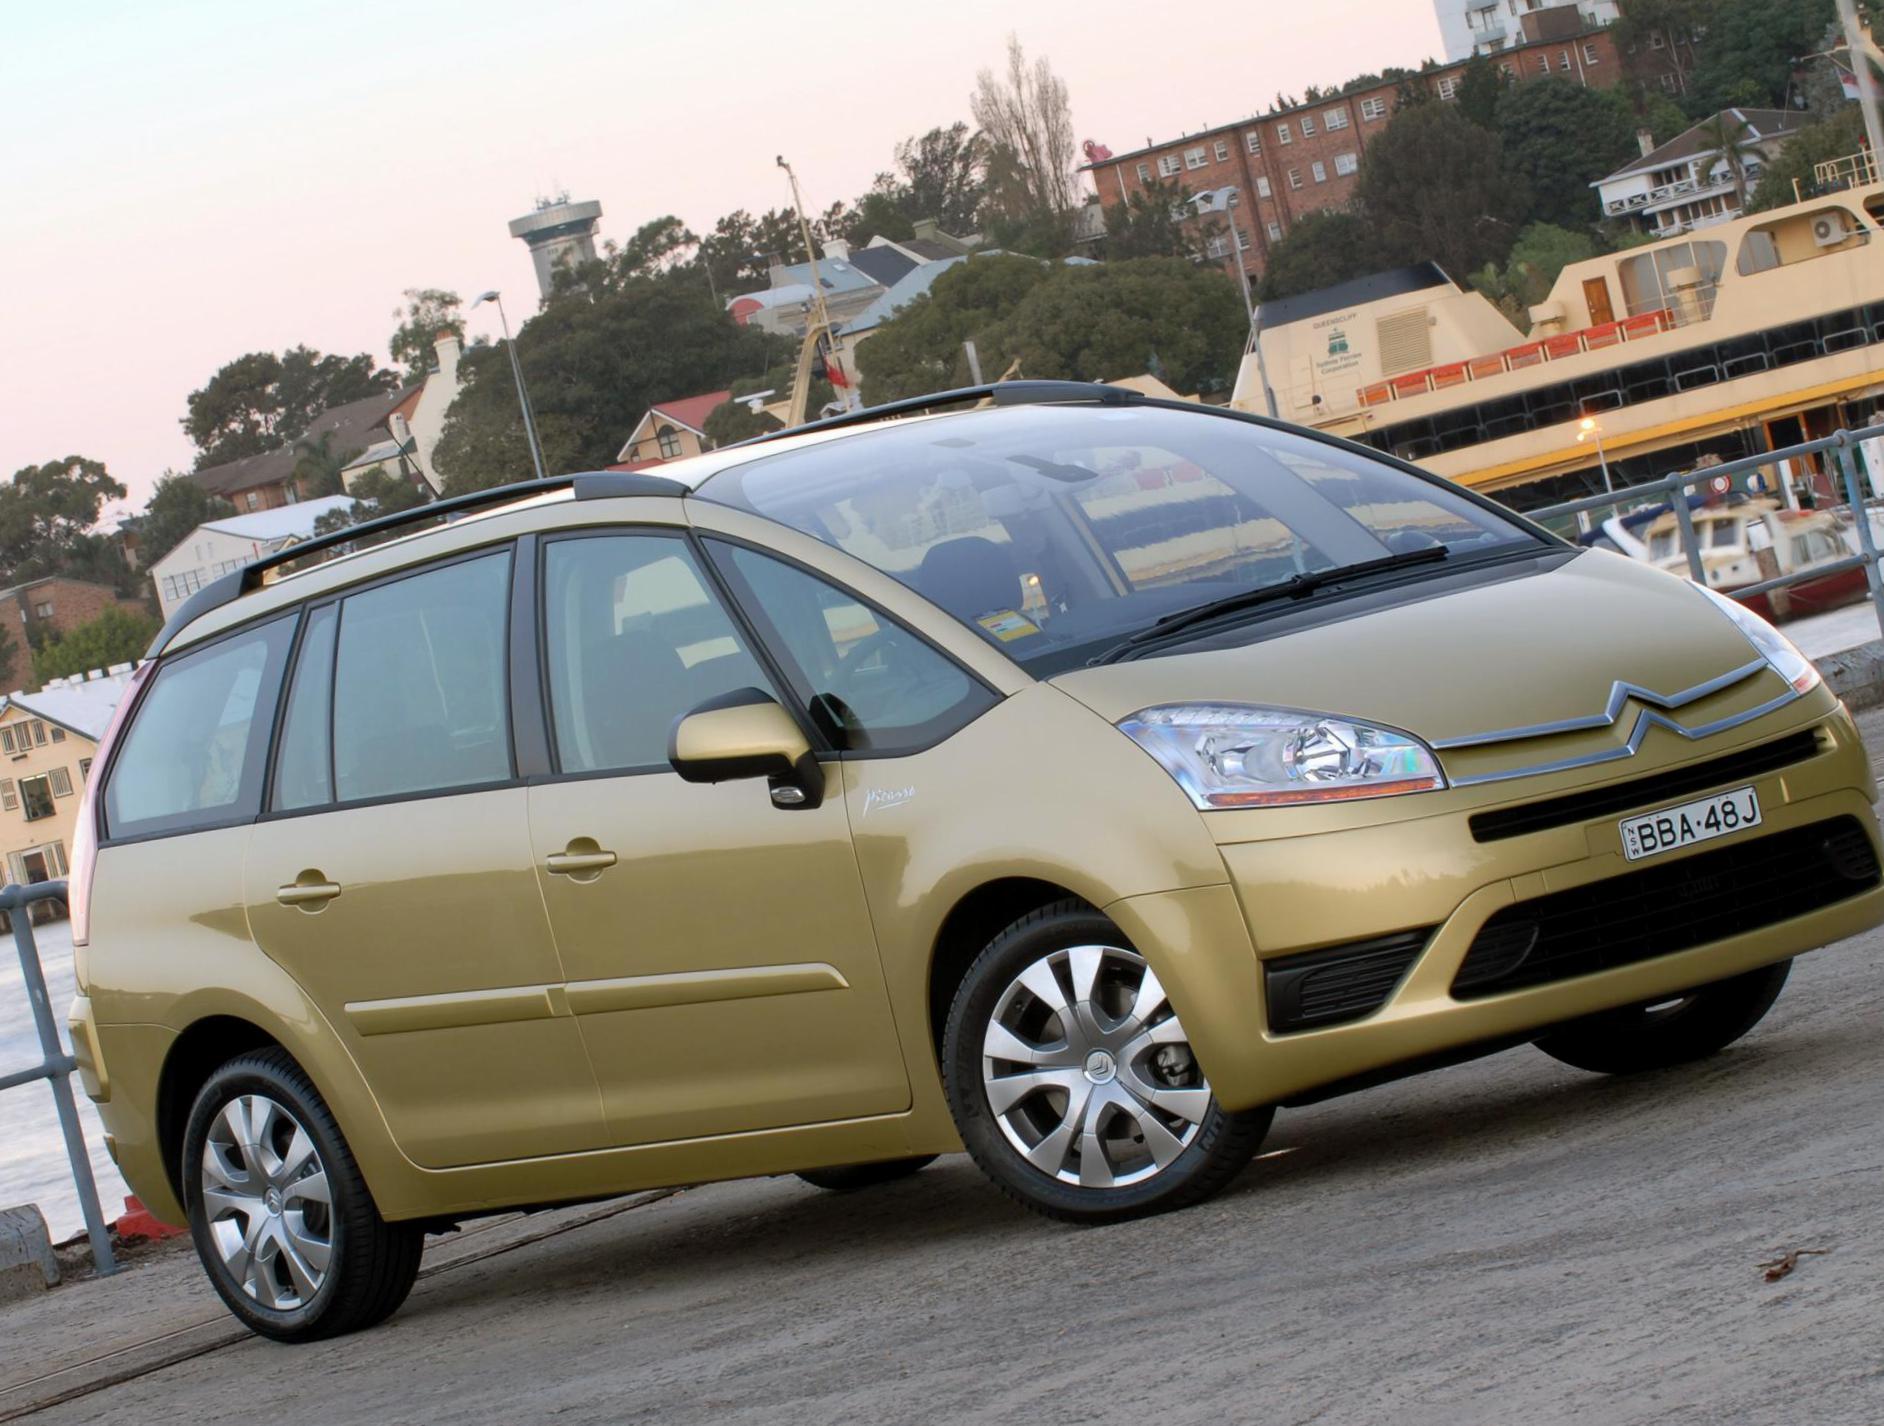 Grand C4 Picasso Citroen Specifications hatchback